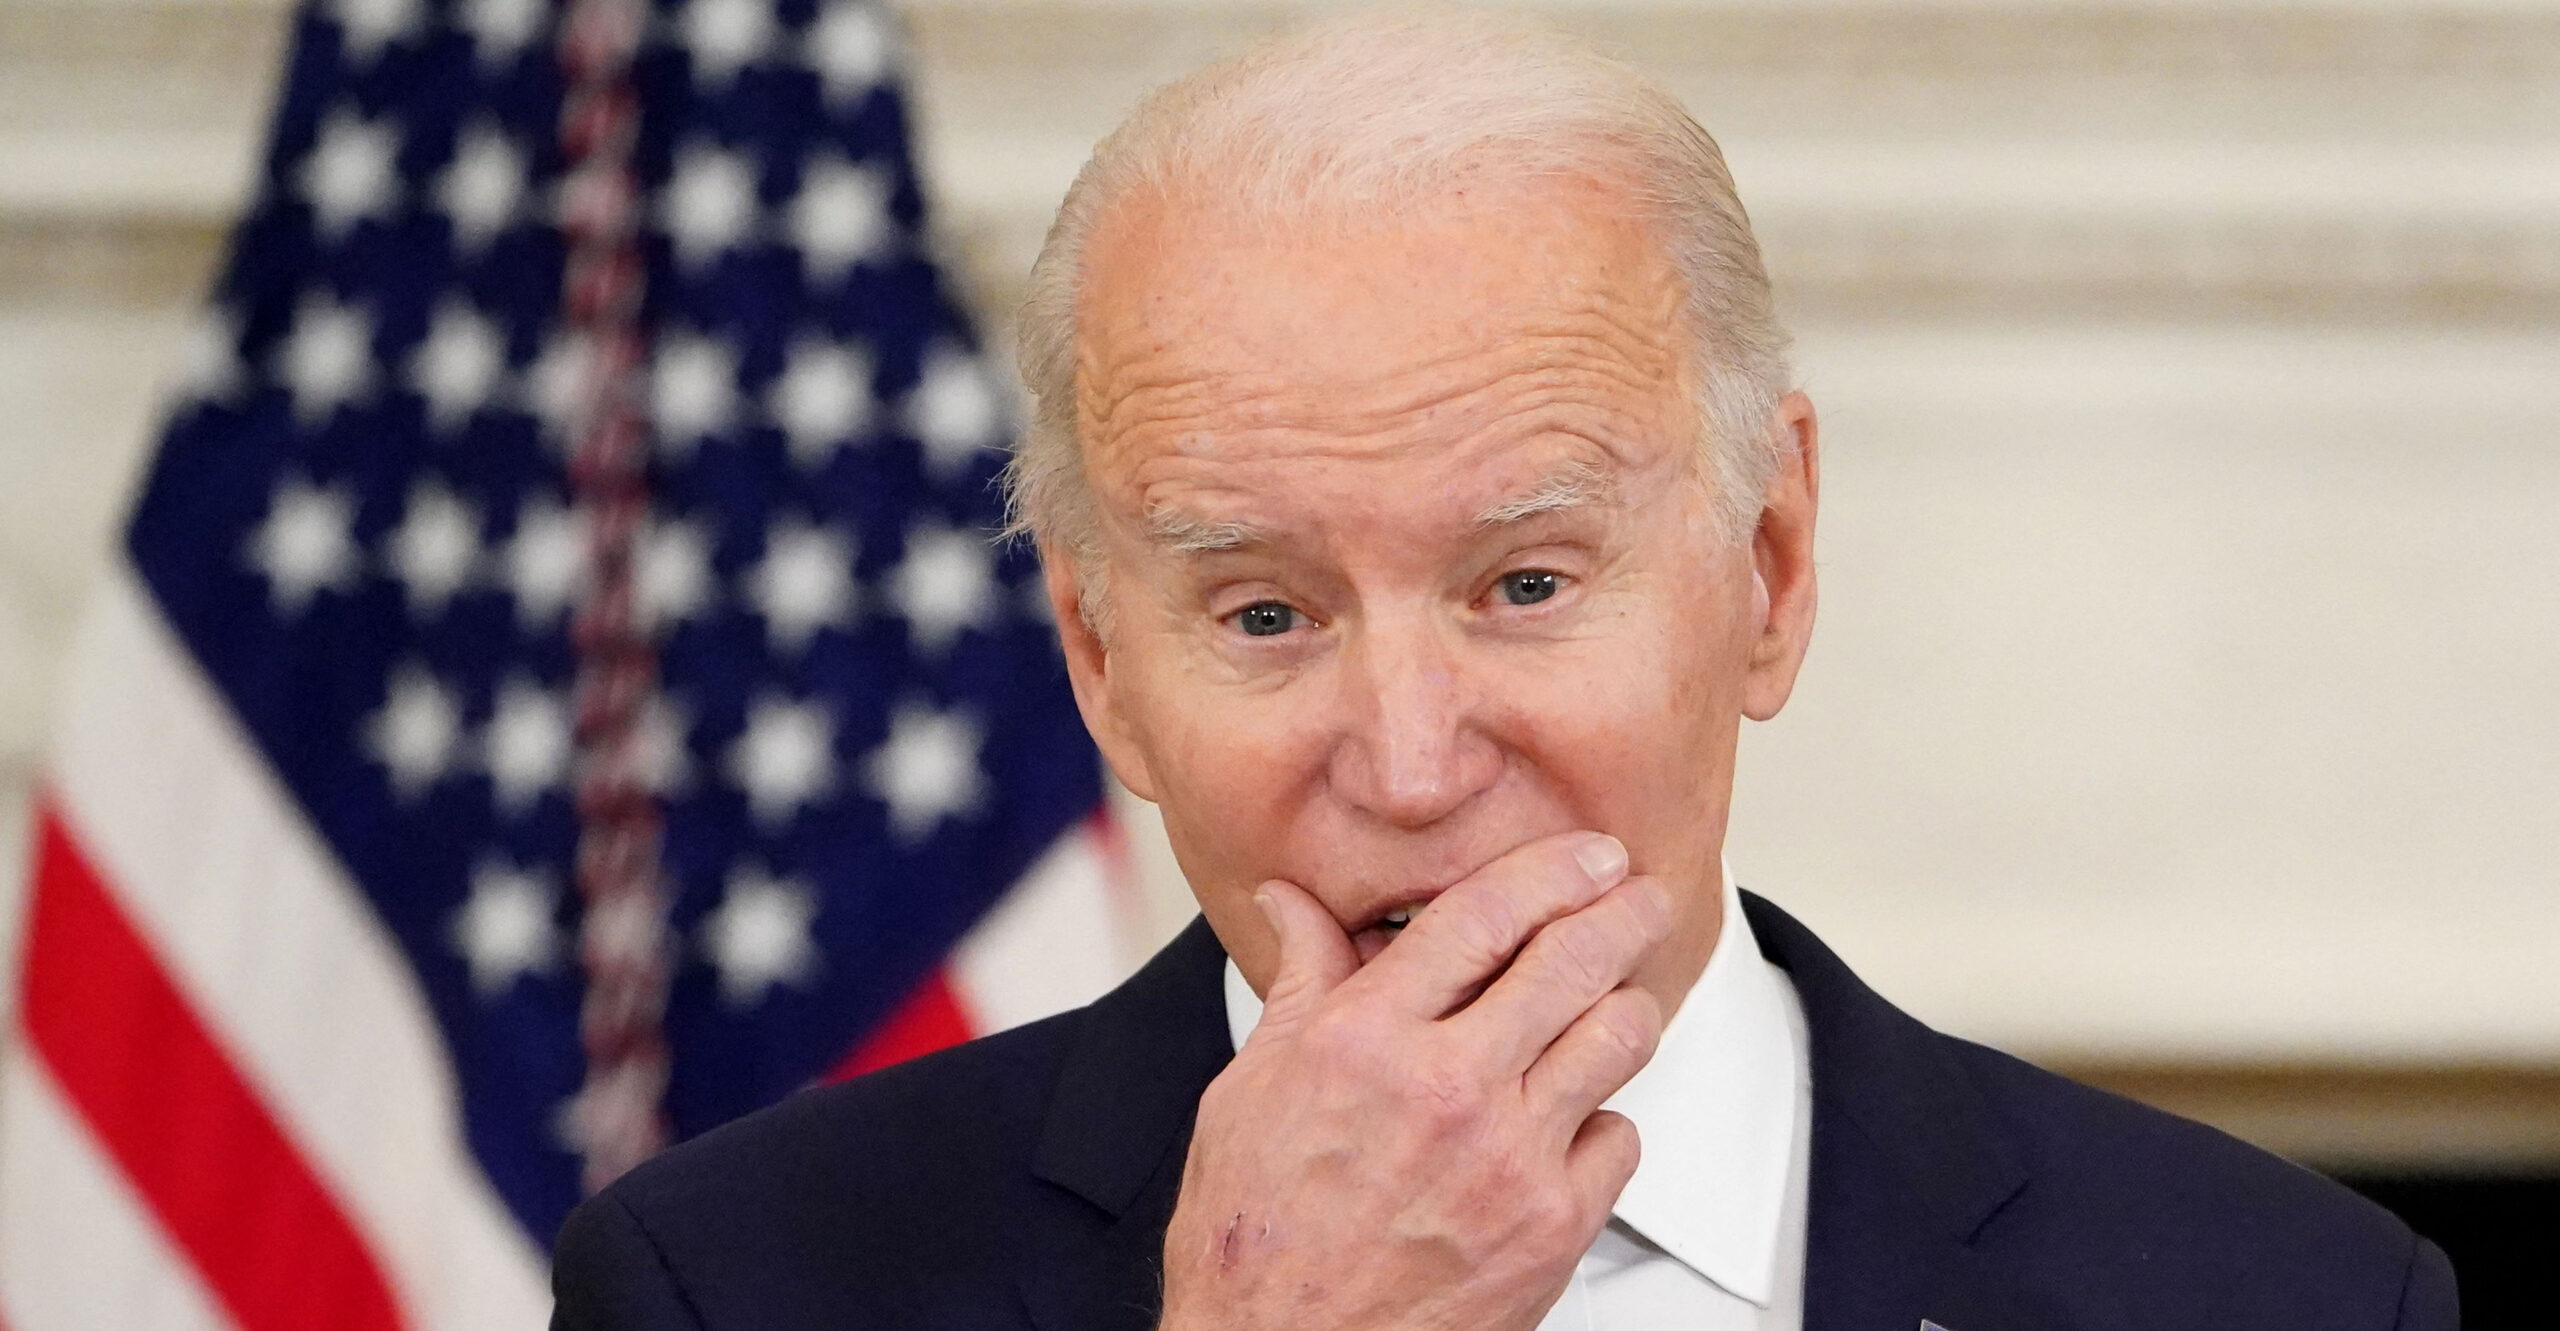 Psychiatrist Who Called Trump Presidency ‘Dangerous’ Unconcerned About Biden or Special Counsel’s Report